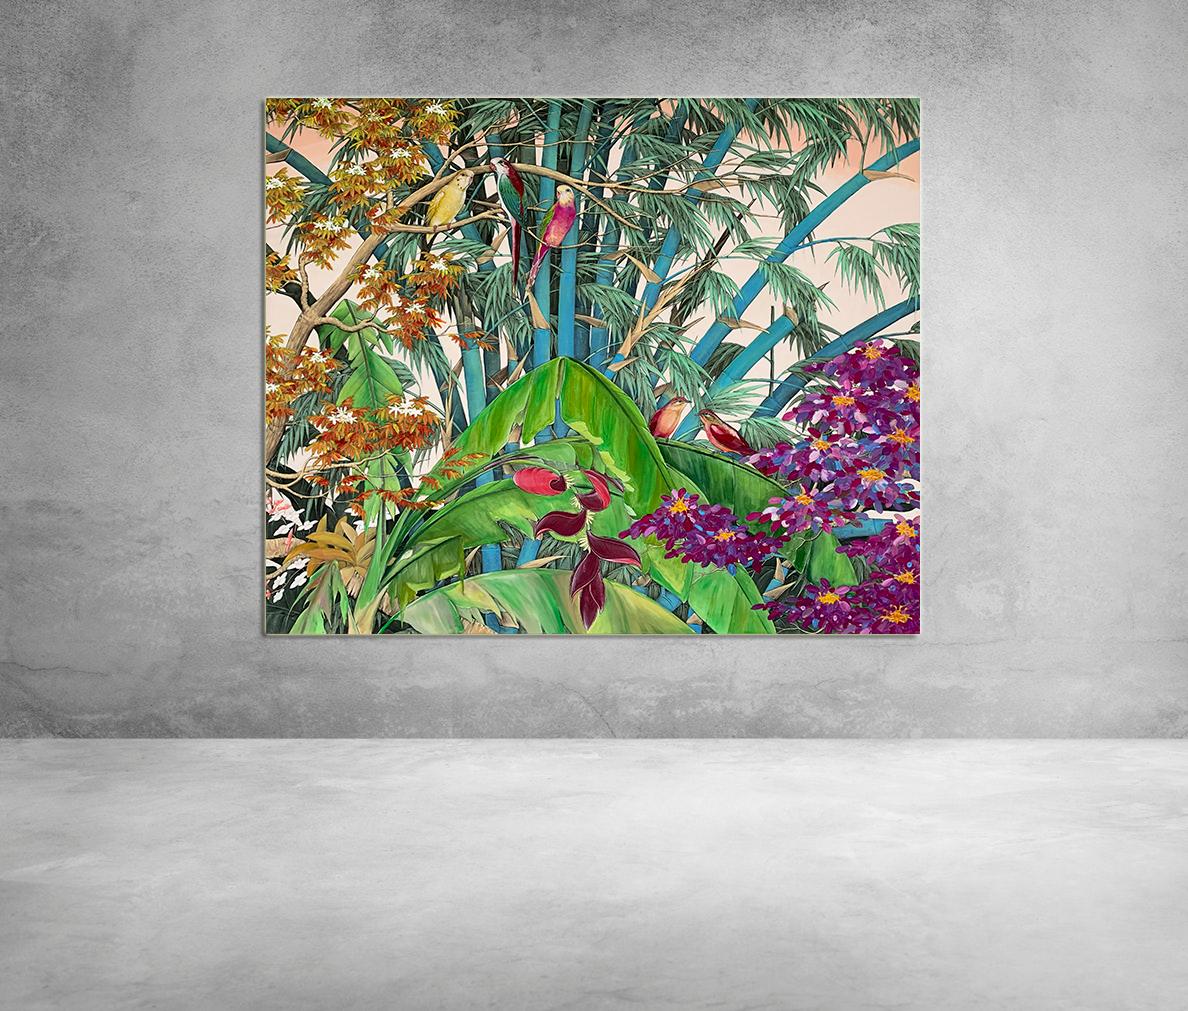 New Beginnings by Katharina Husslein contemporary birds and jungle landscape 1